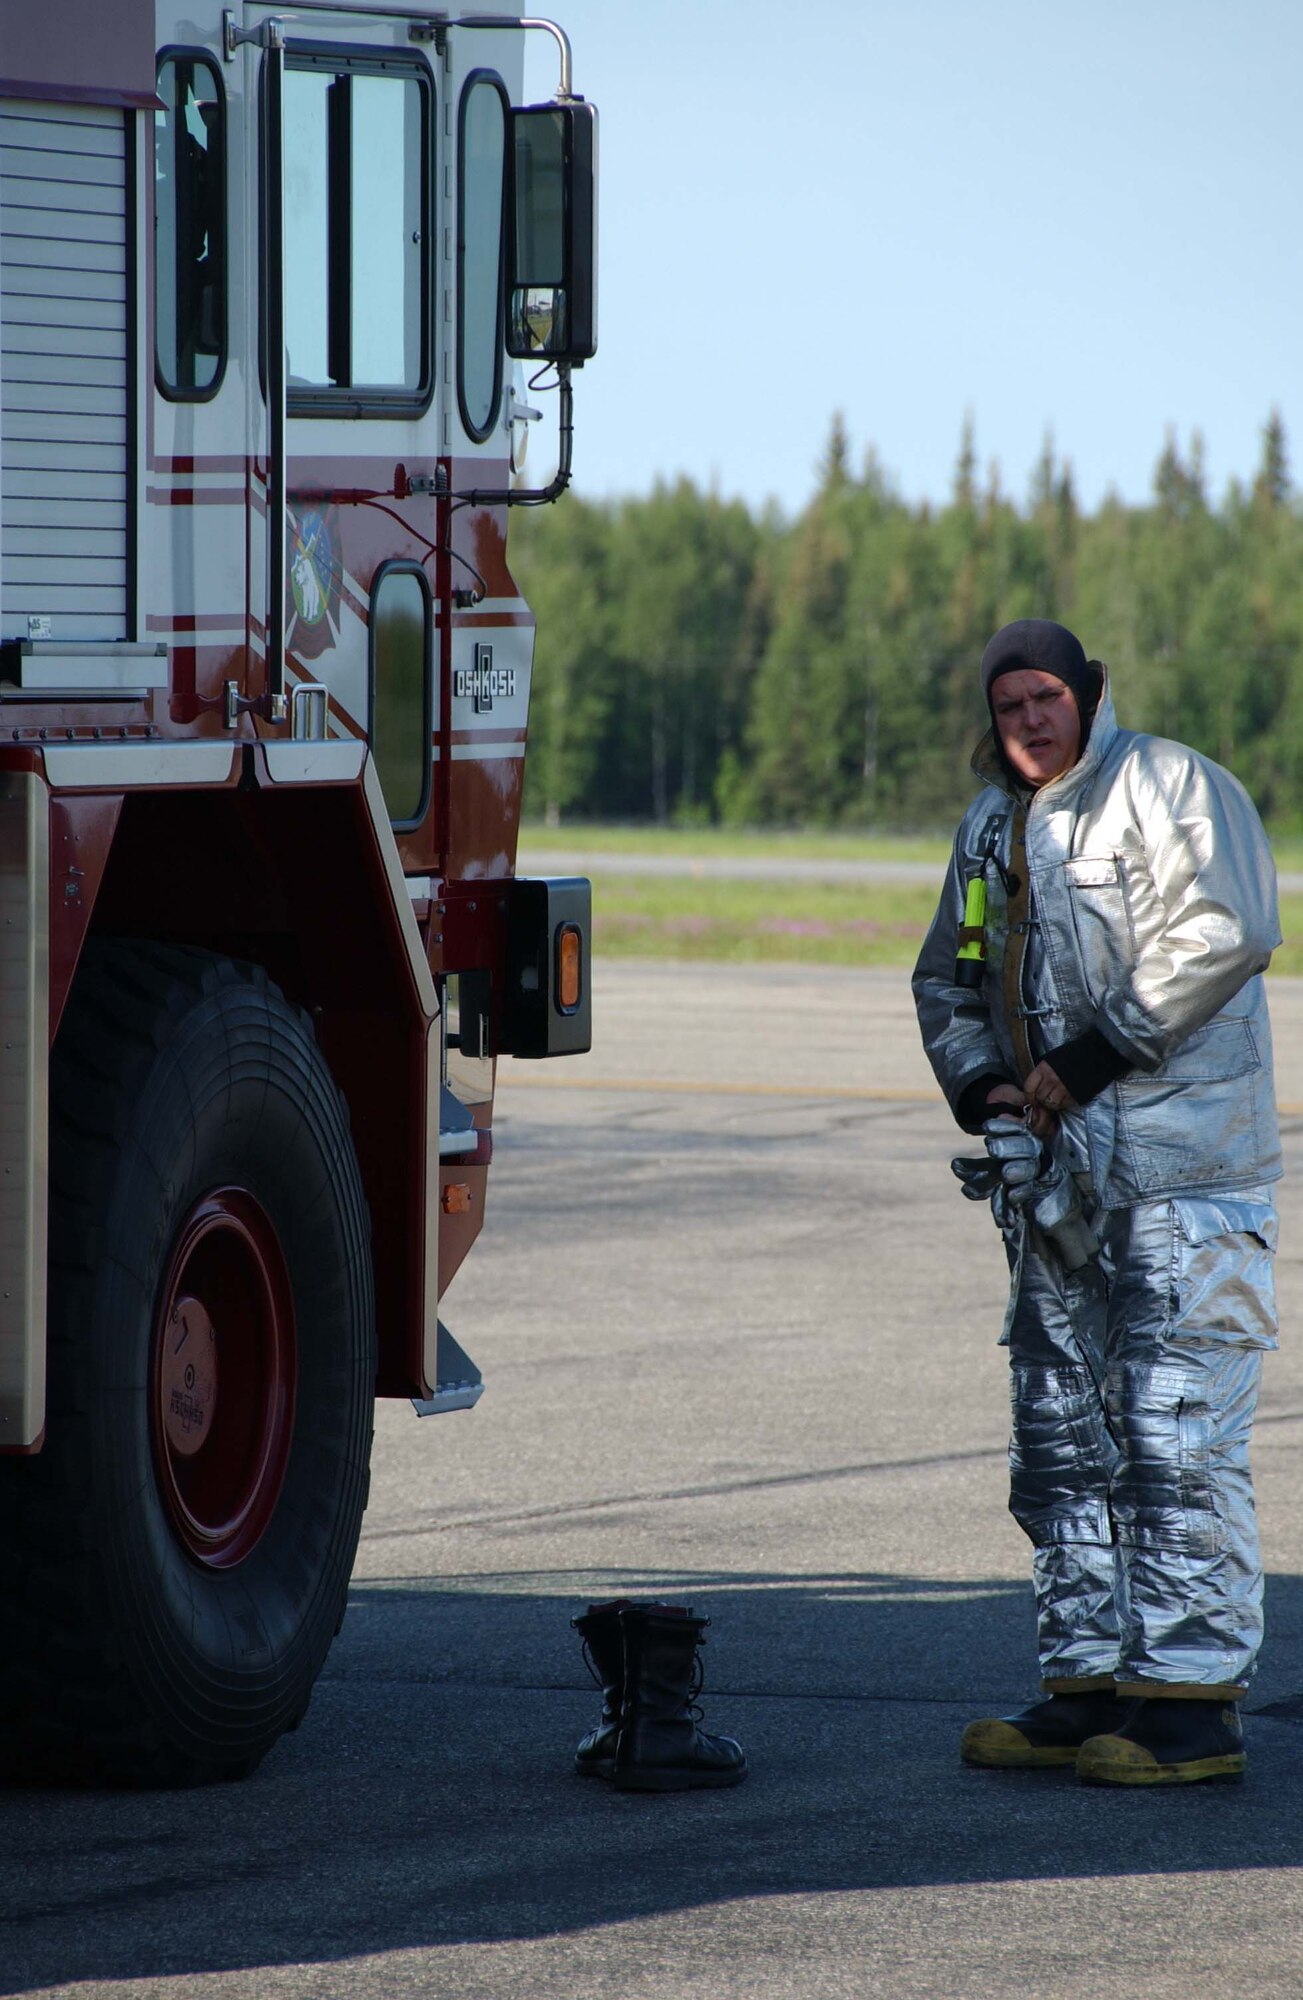 EIELSON AIR FORCE BASE, Alaska - A 354th Civil Engineer Squadron fireman suits up to respond to a simulated F-16 crash June 19 here. Eielson held an Emergency Management Exercise simulating an aircraft crashing during the upcoming Open House which will help in the response and reaction for unforeseen events. 
 (U.S. Air Force photo by Airman 1st Class Christopher Griffin)